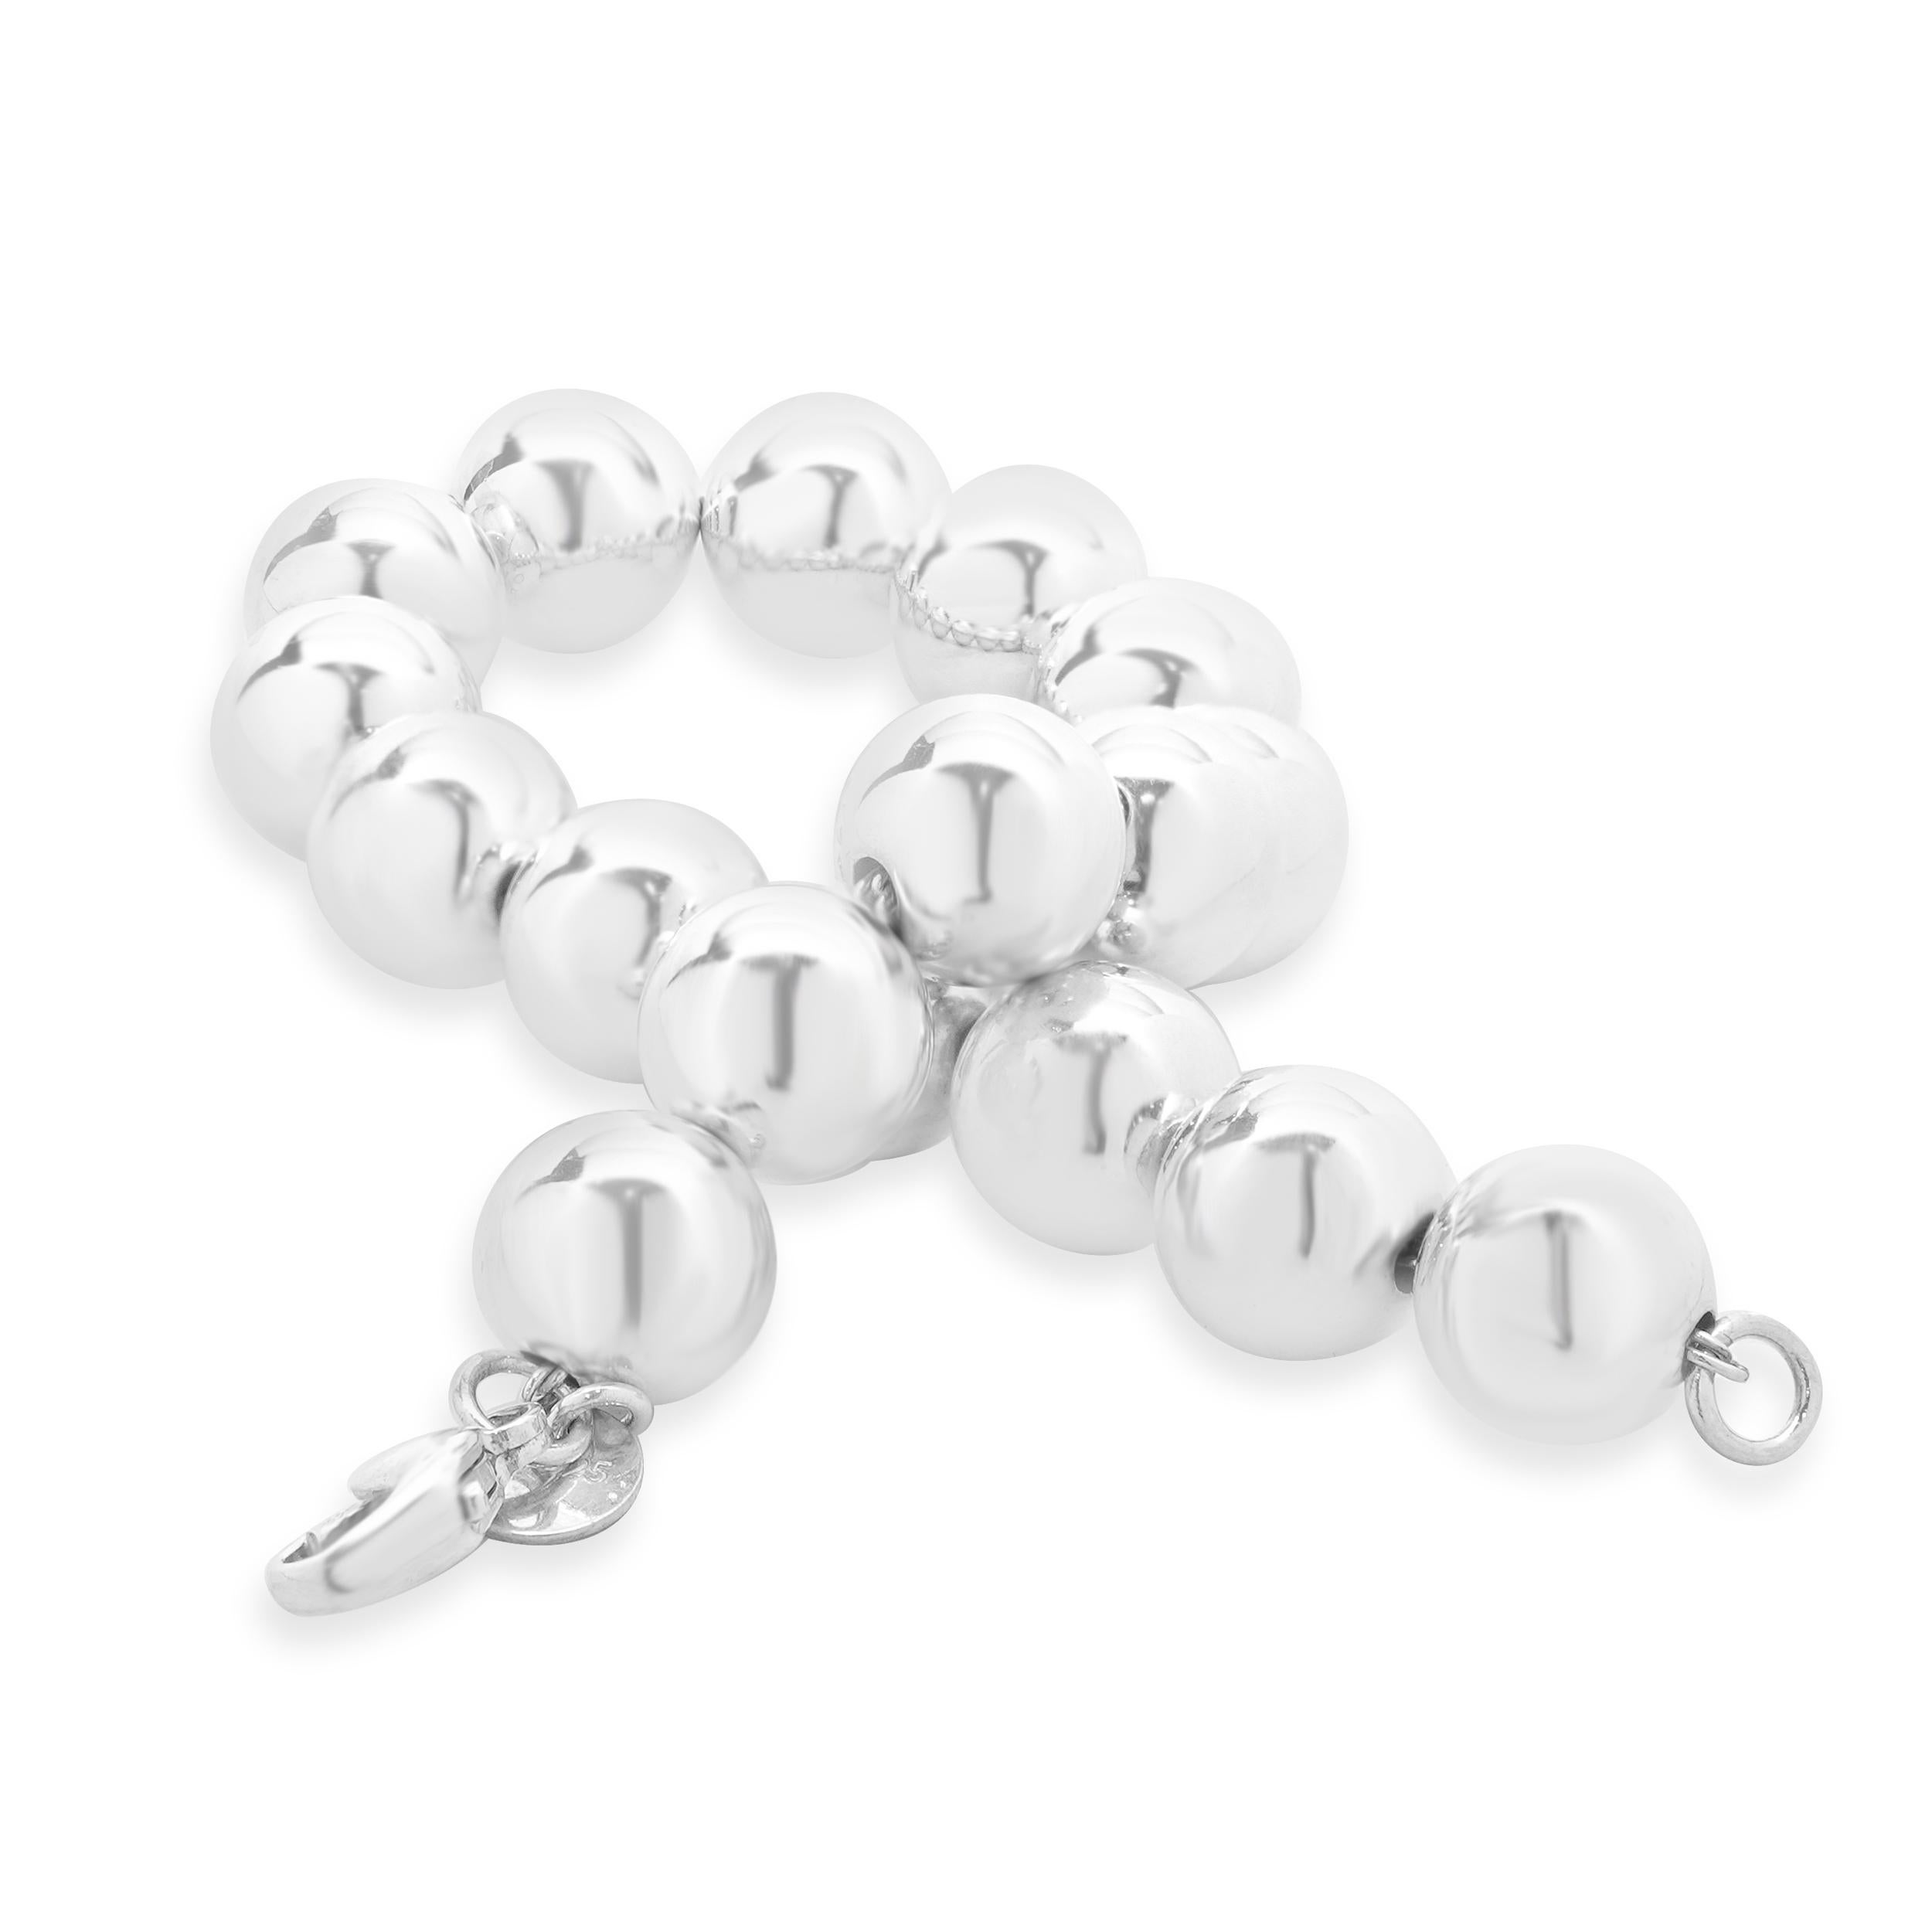 Tiffany & Co. Sterling Silver Hardwear Collection Ball Bracelet In Excellent Condition For Sale In Scottsdale, AZ